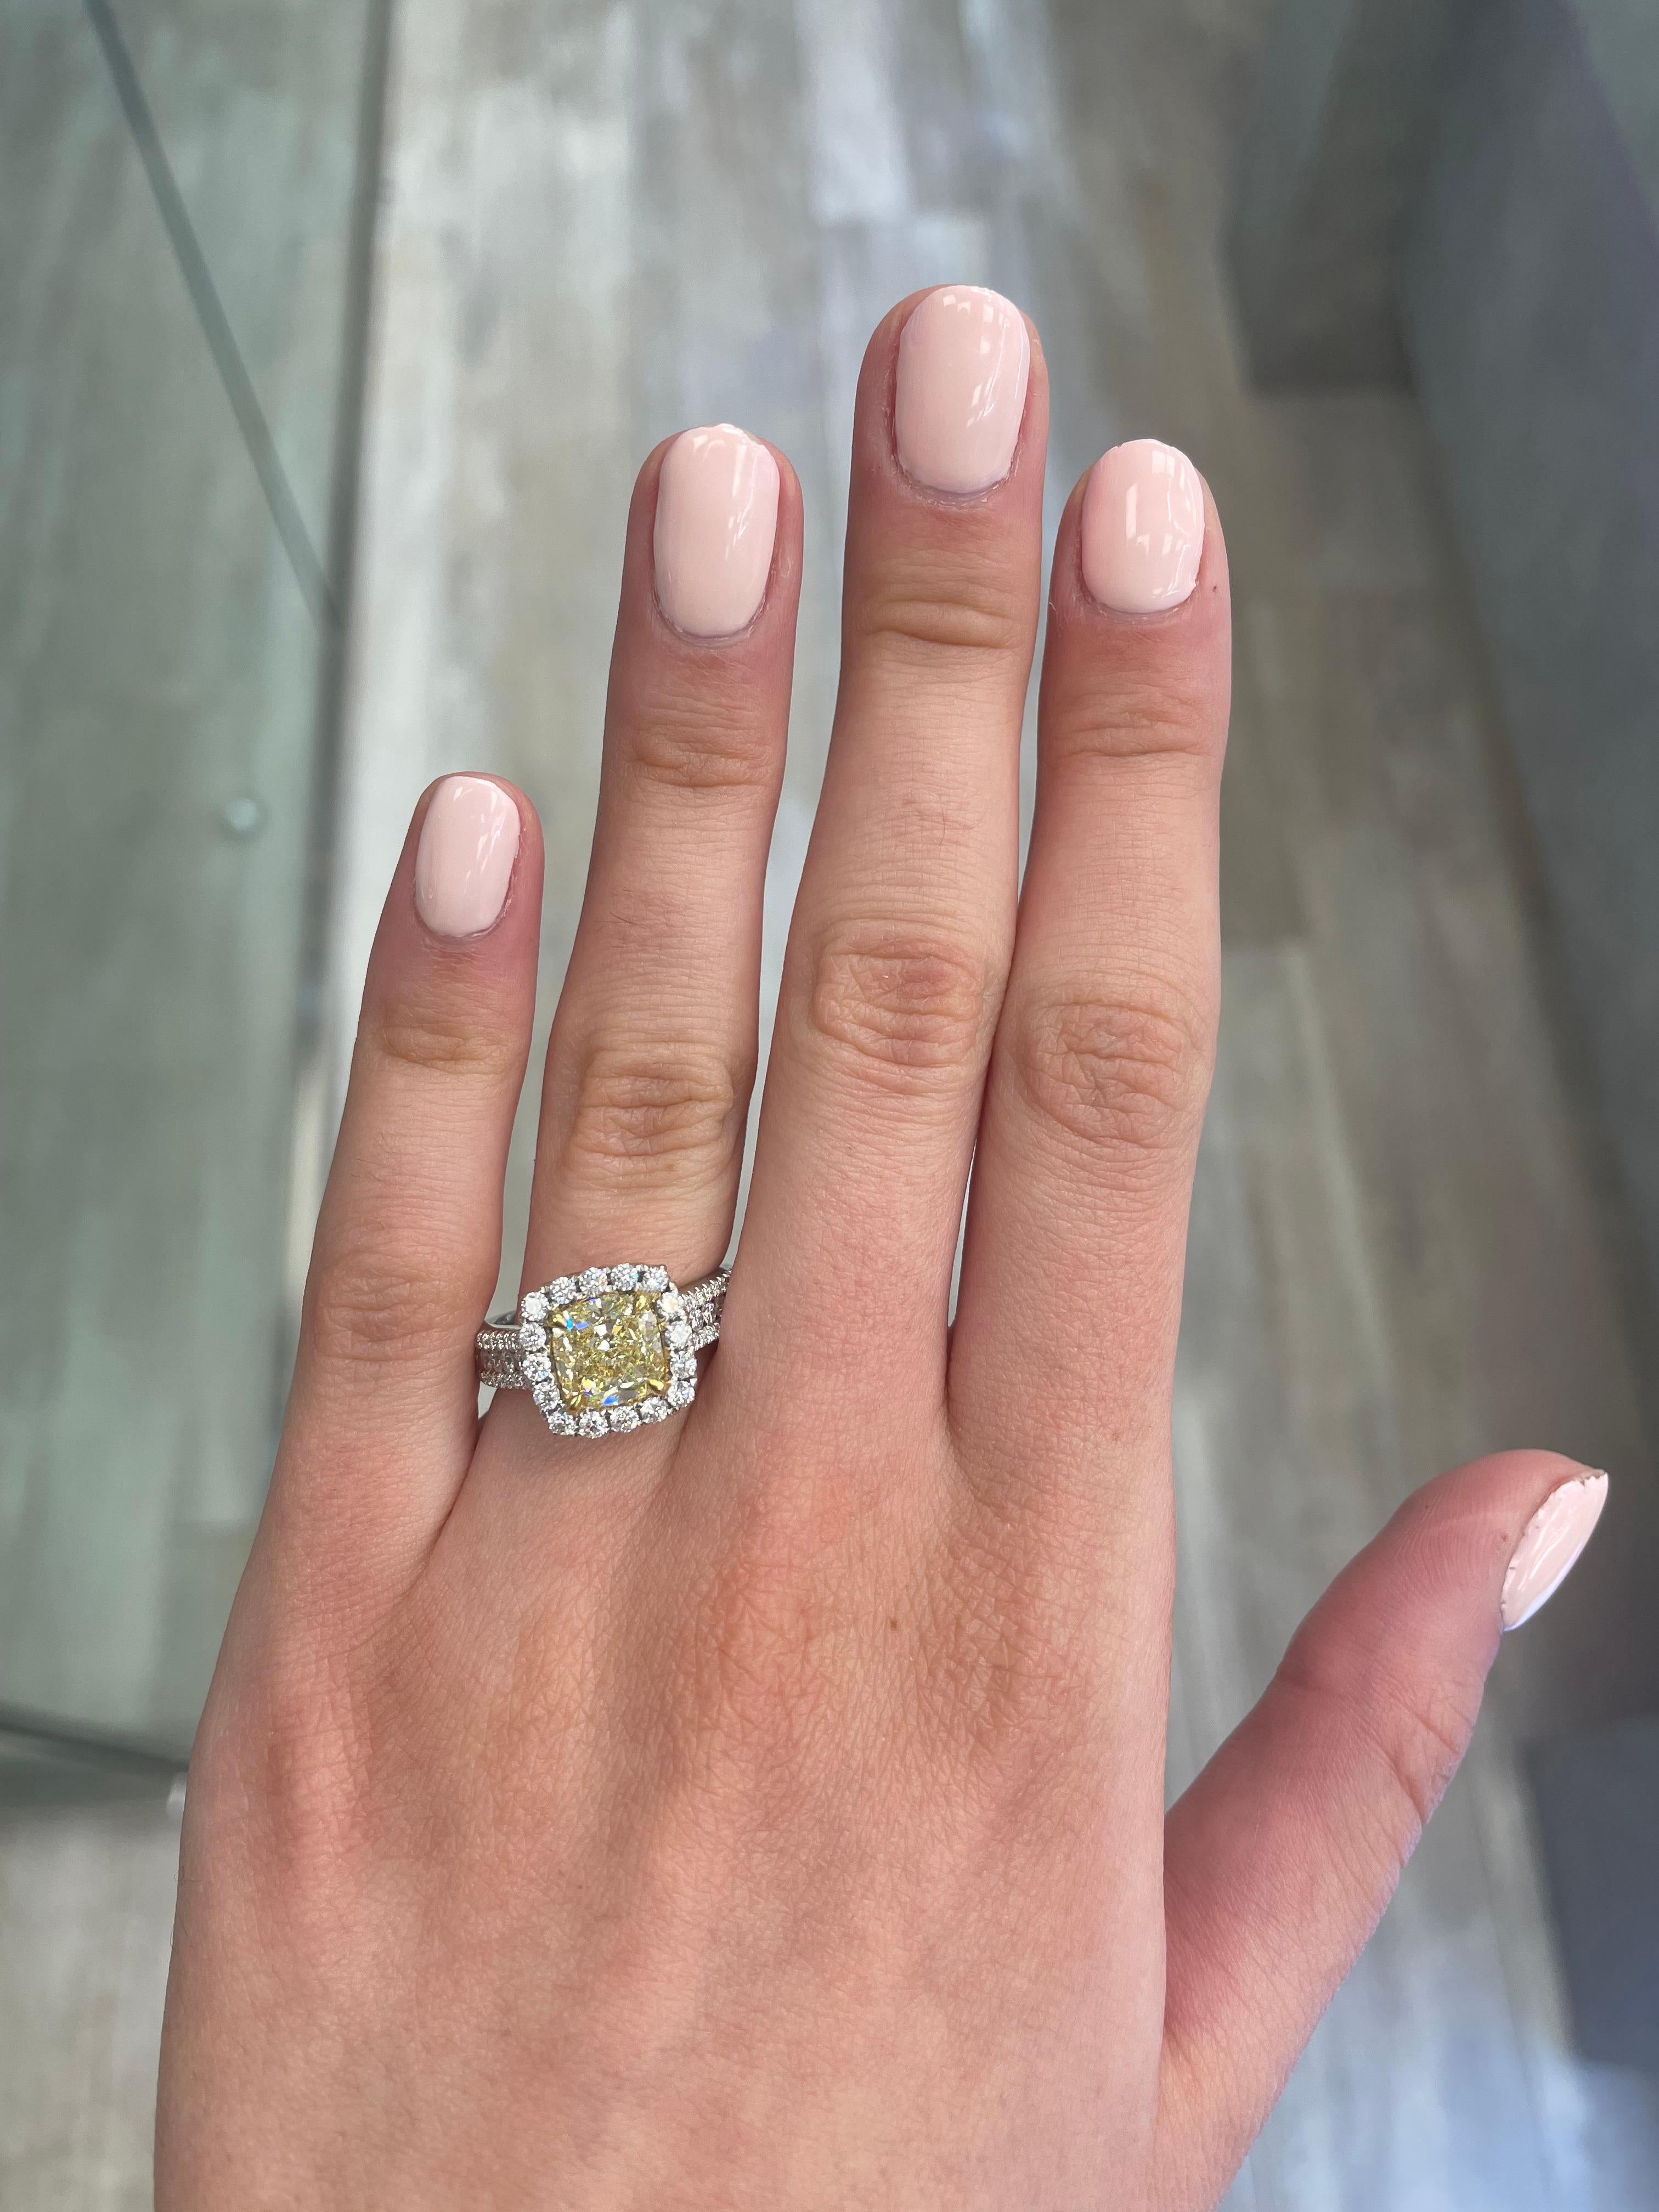 Stunning modern EGL certified yellow diamond with halo ring, two-tone 18k yellow and white gold, split shank. By Alexander Beverly Hills
3.32 carats total diamond weight.
2.38 carat cushion cut Fancy Yellow color and SI1 clarity diamond, EGL graded.